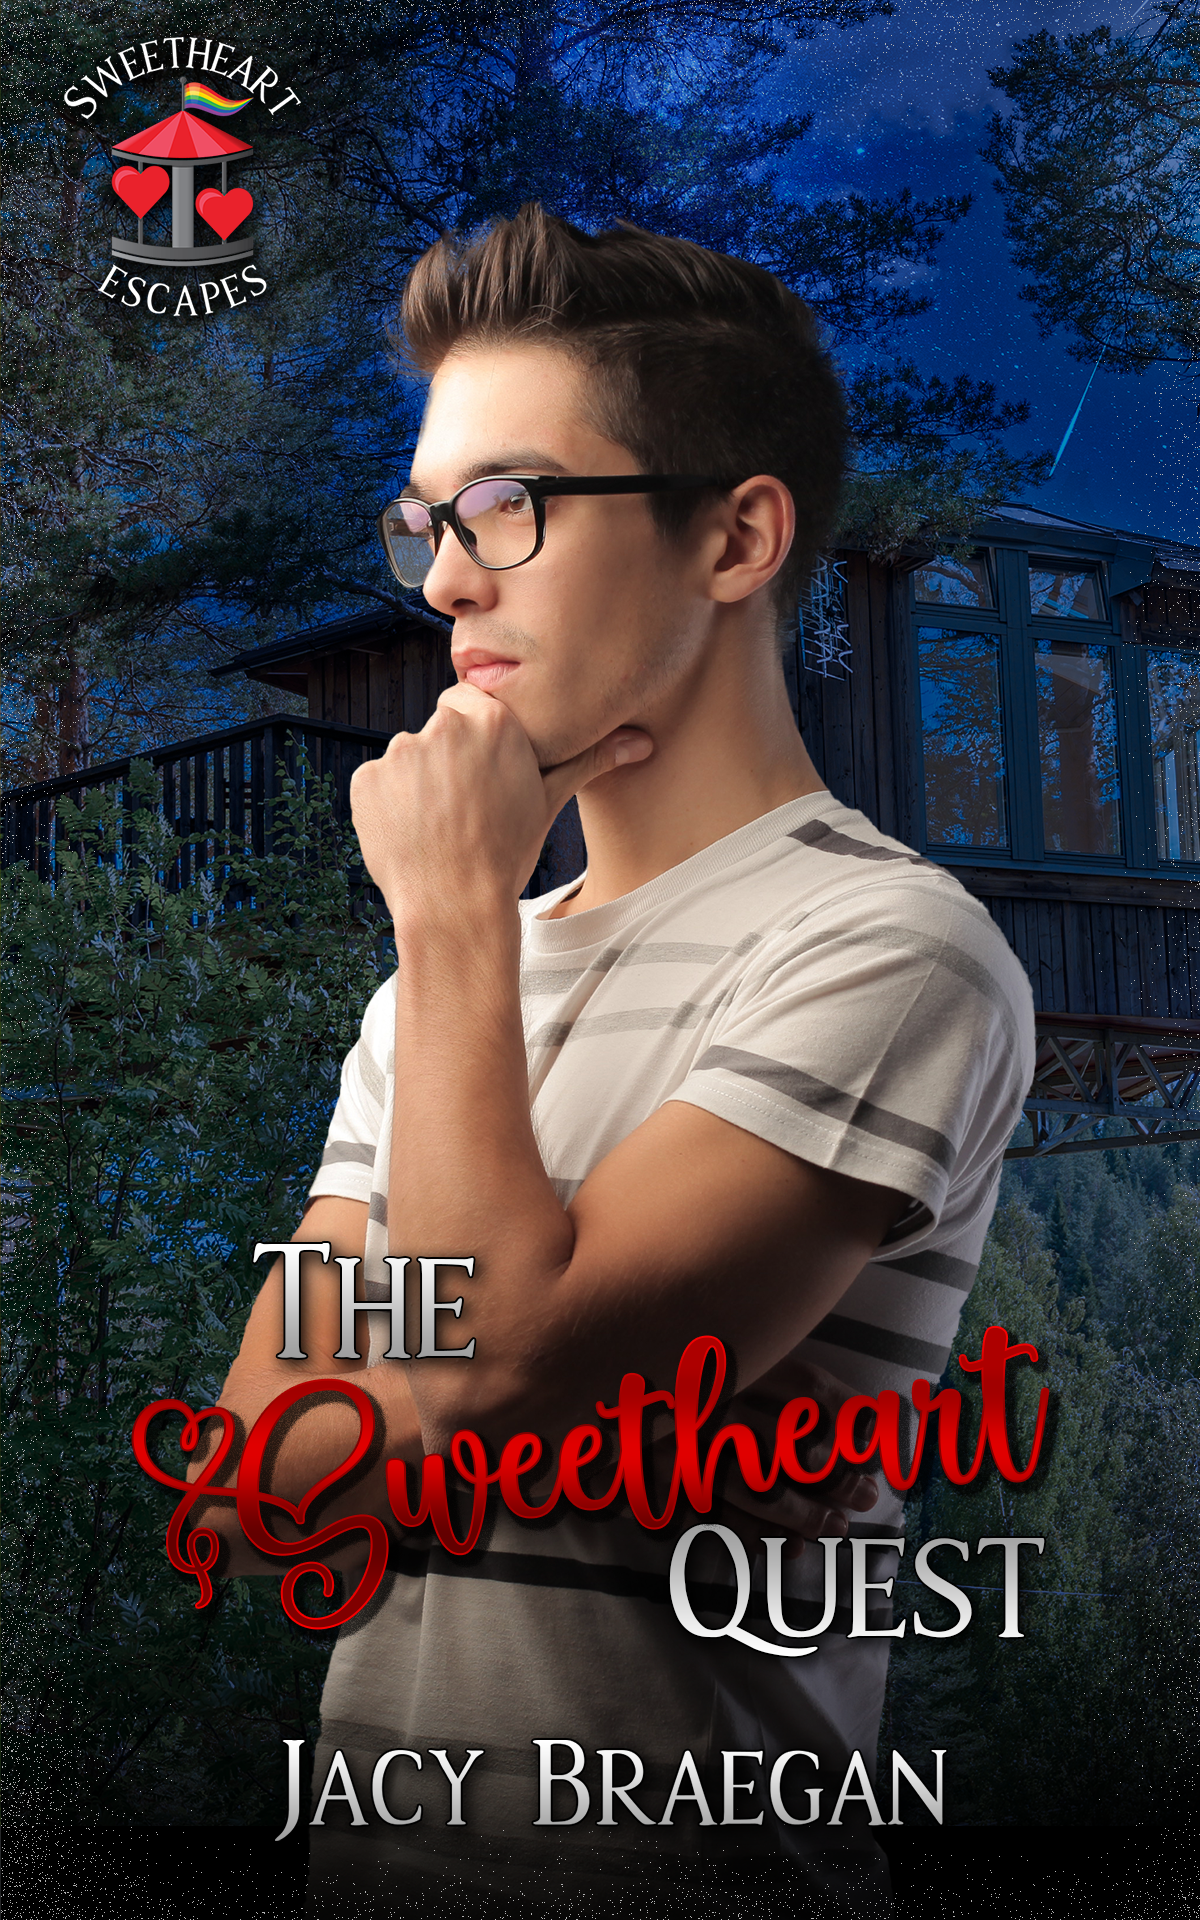 The Sweetheart Quest ebook cover